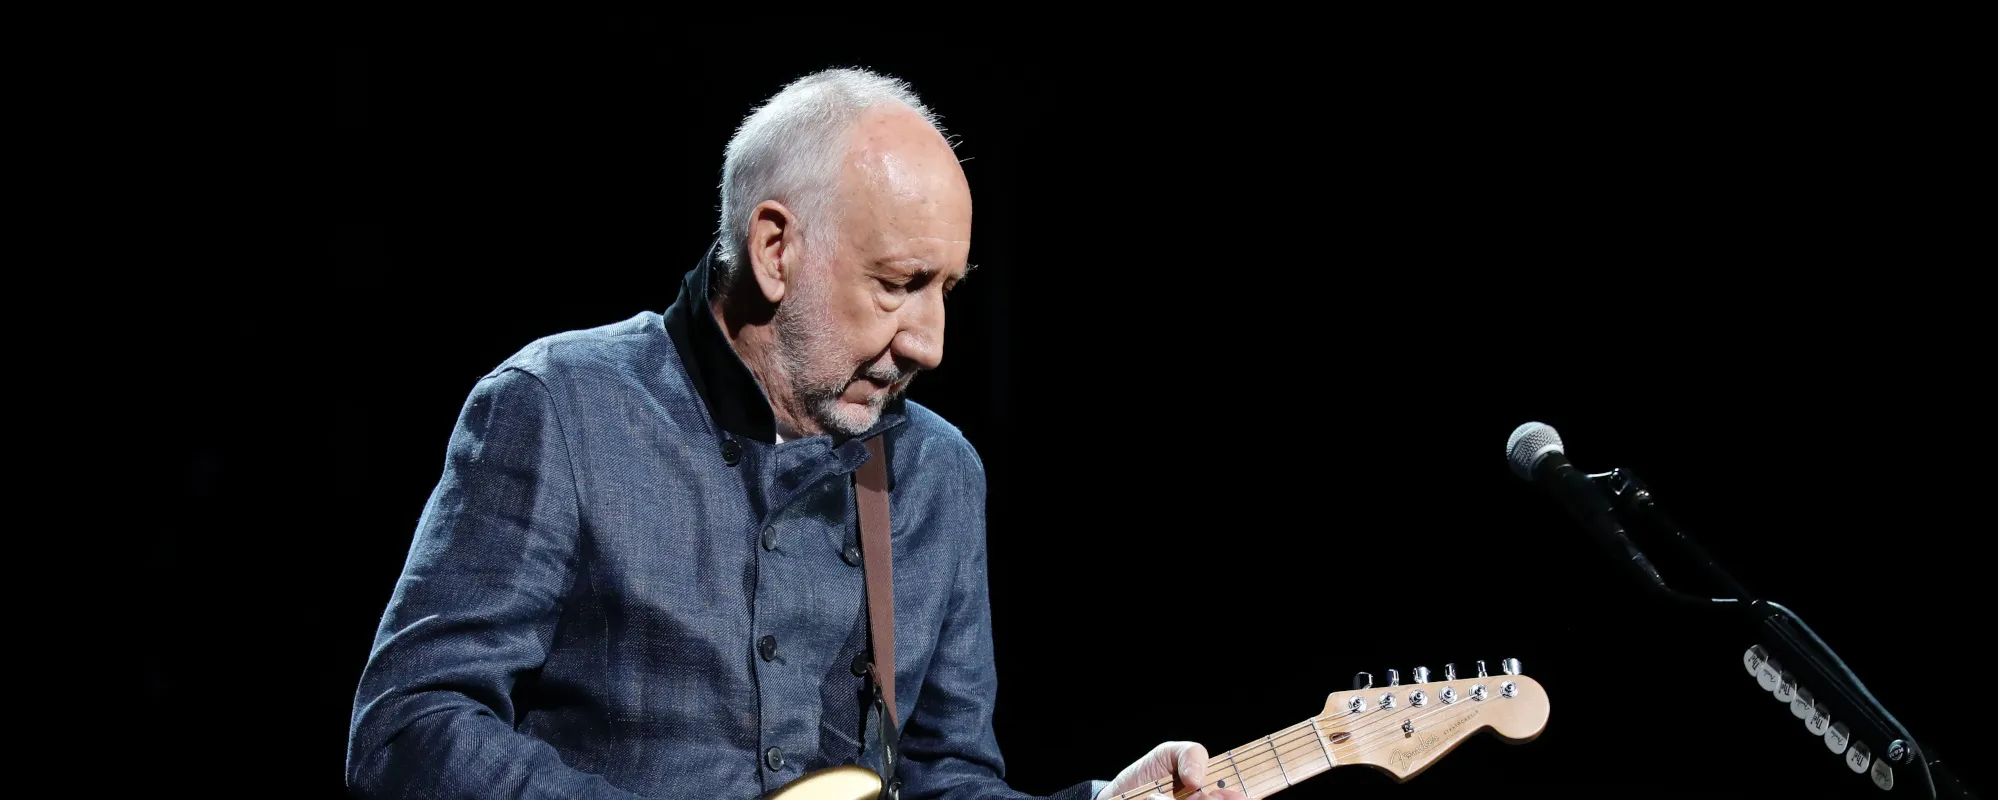 The Who Song That Pete Townshend Called Awful